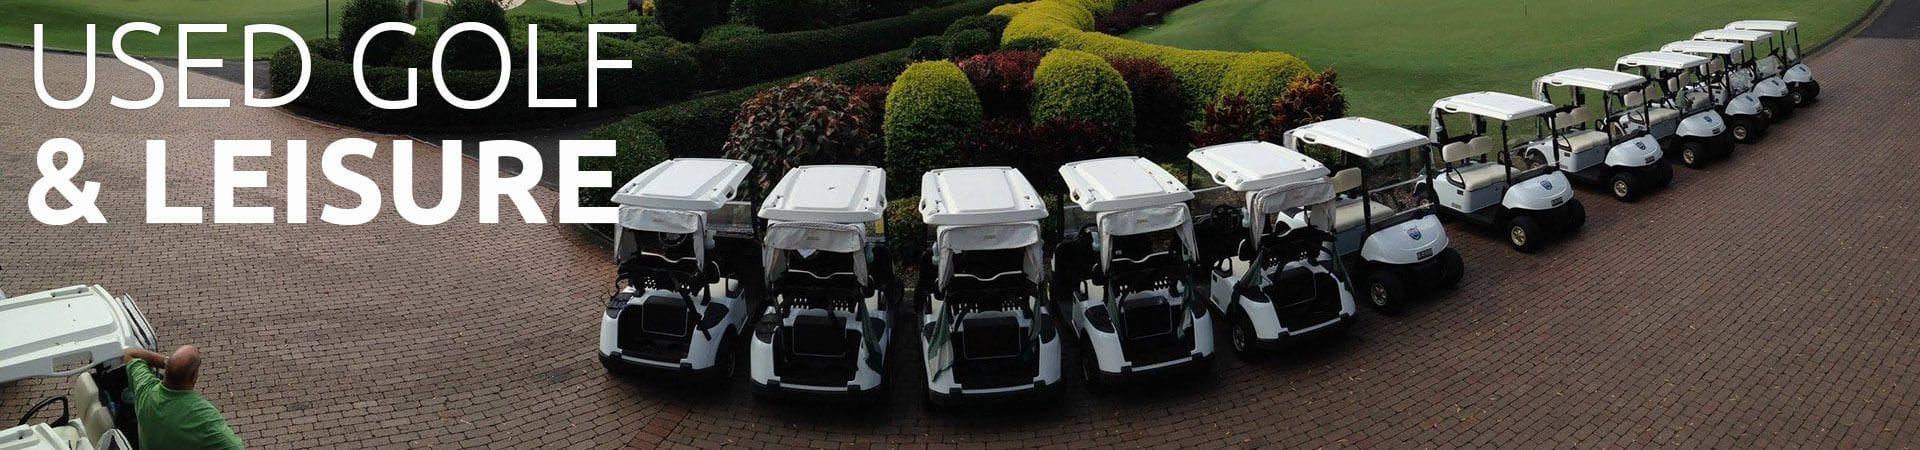 Used Golf and Leisure Vehicles | Golf Car World 